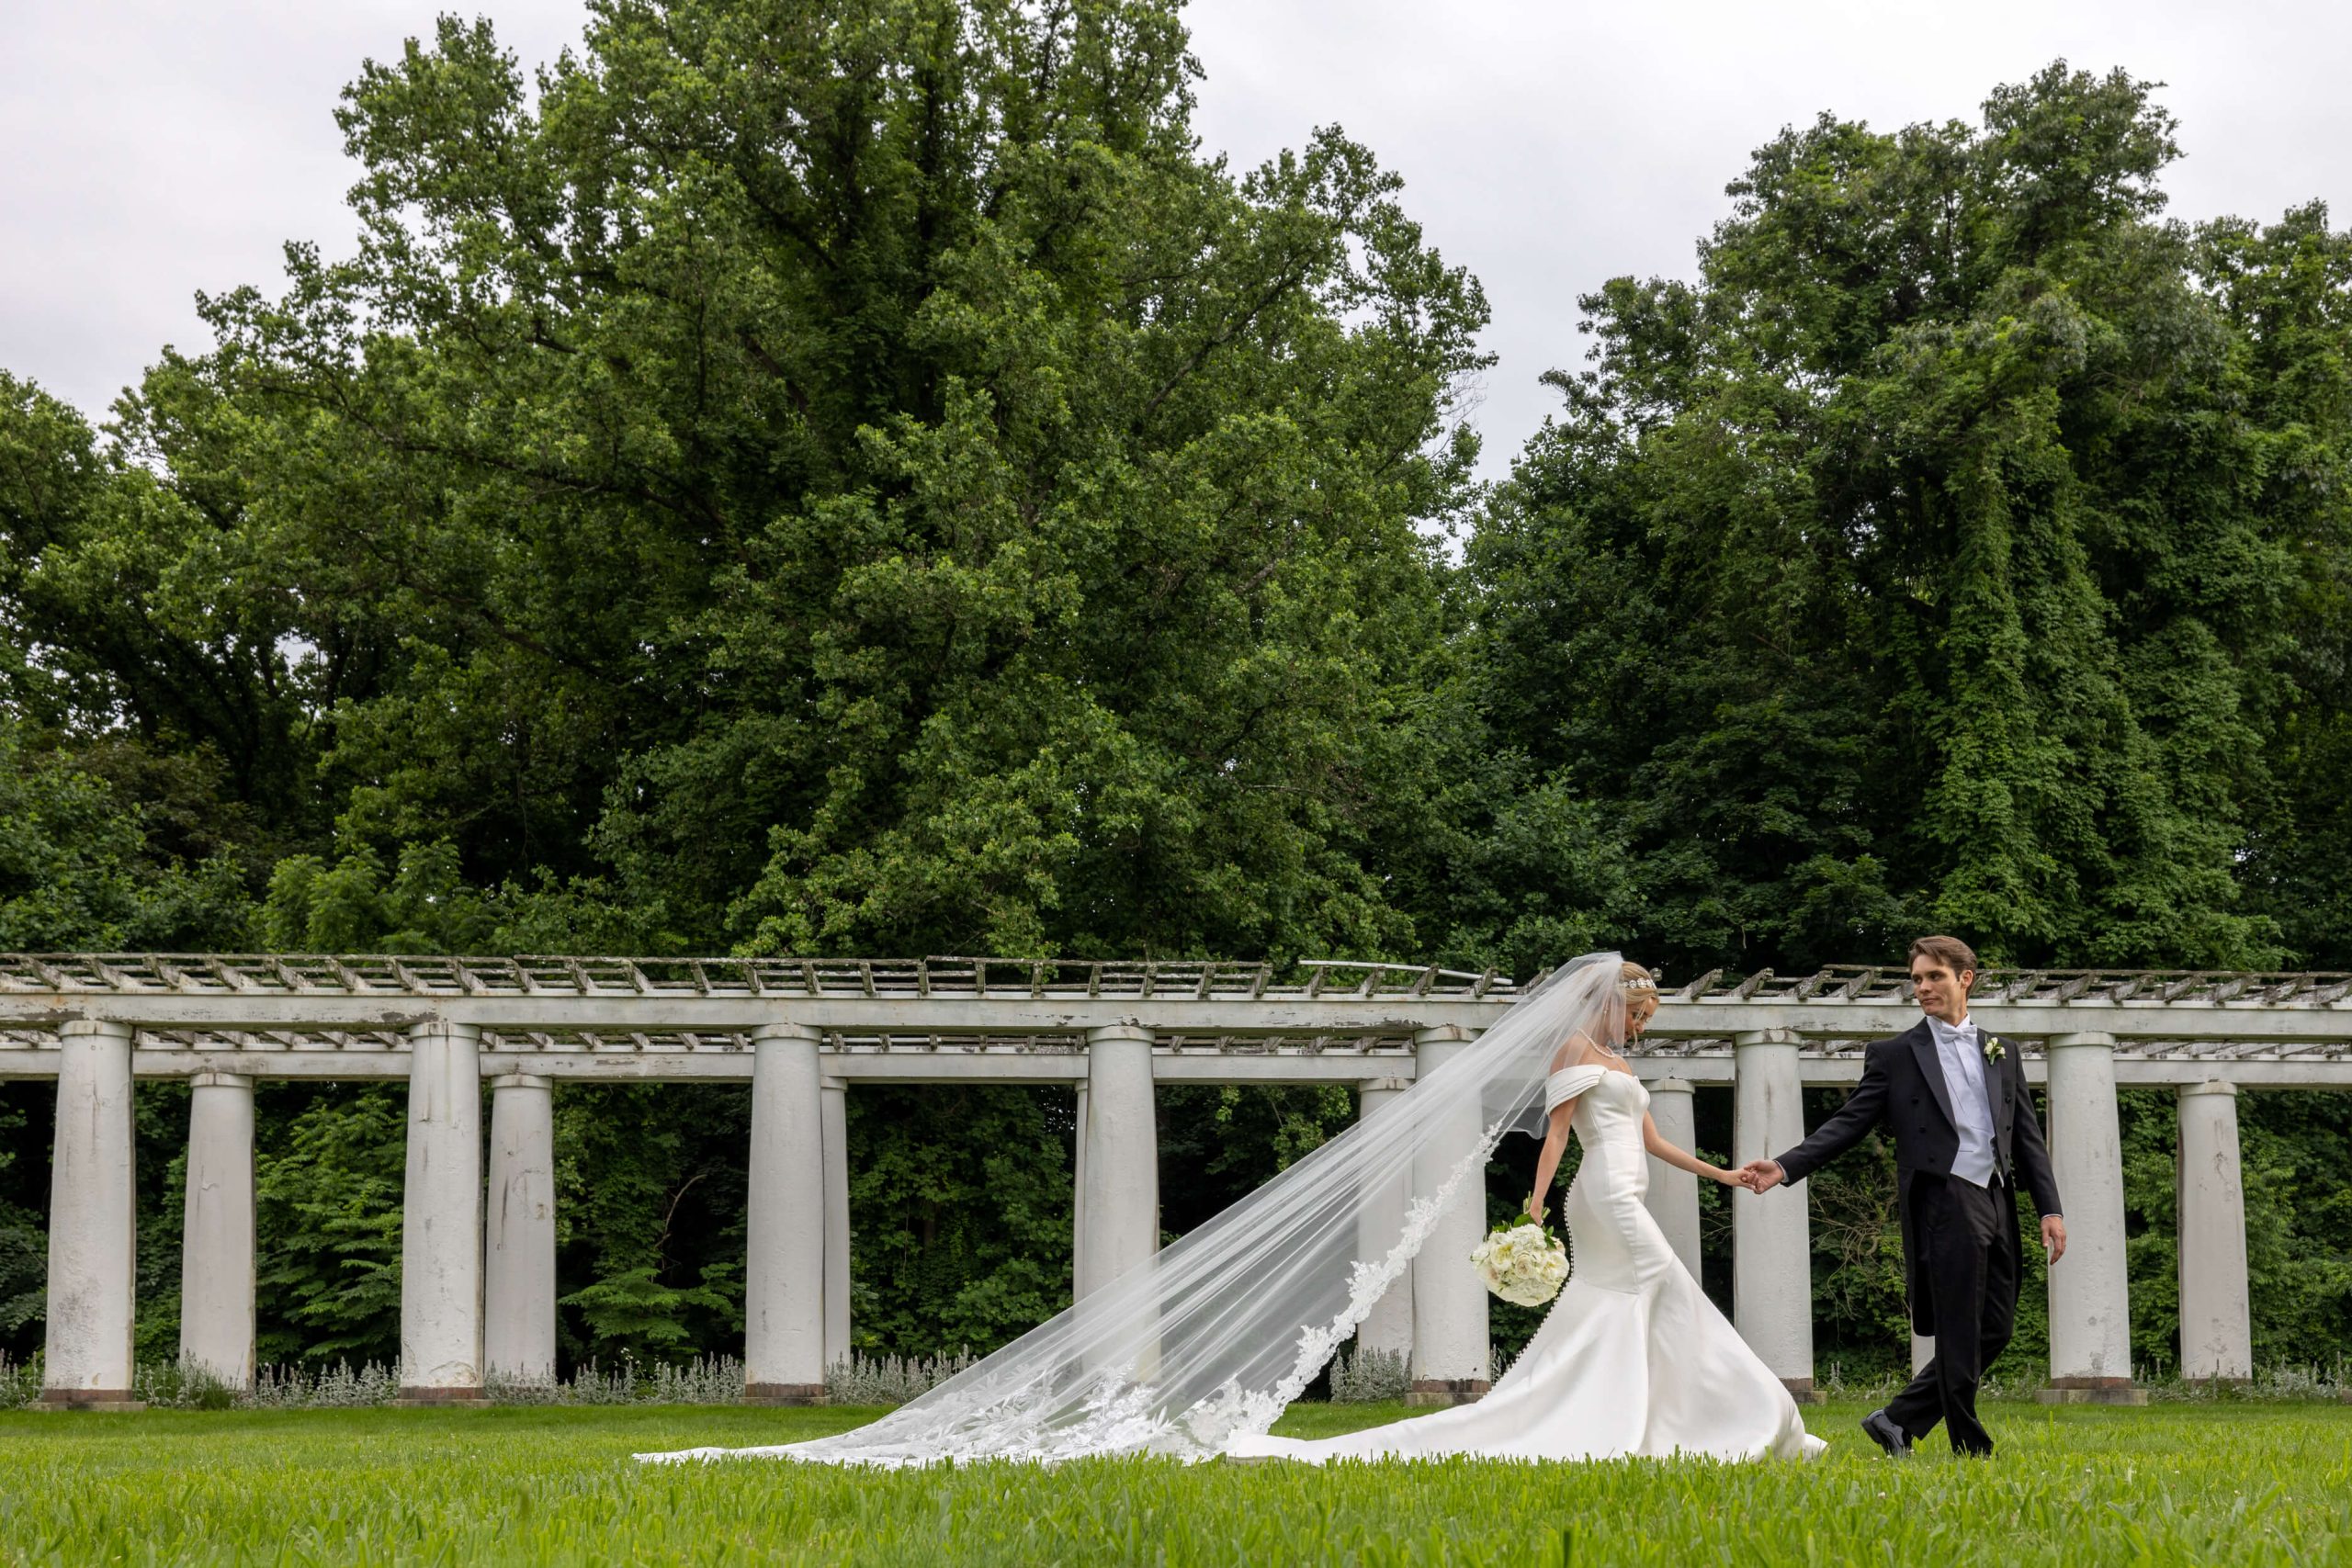 Hire a Professional Wedding Photographer with Experience at Greystone Hall